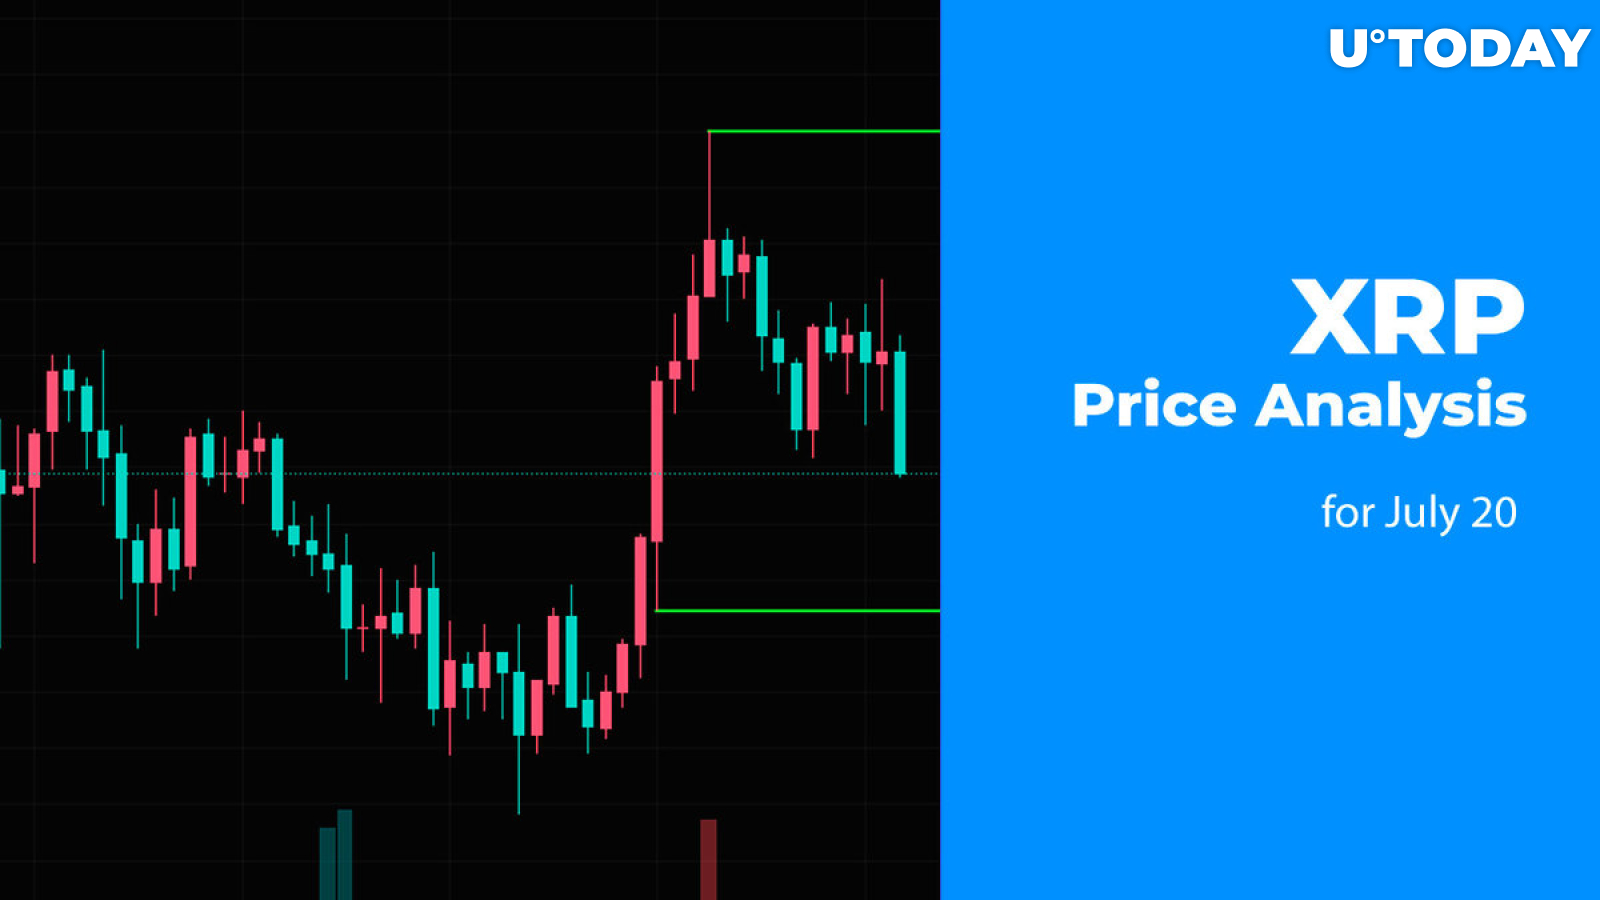 XRP Price Analysis for July 20